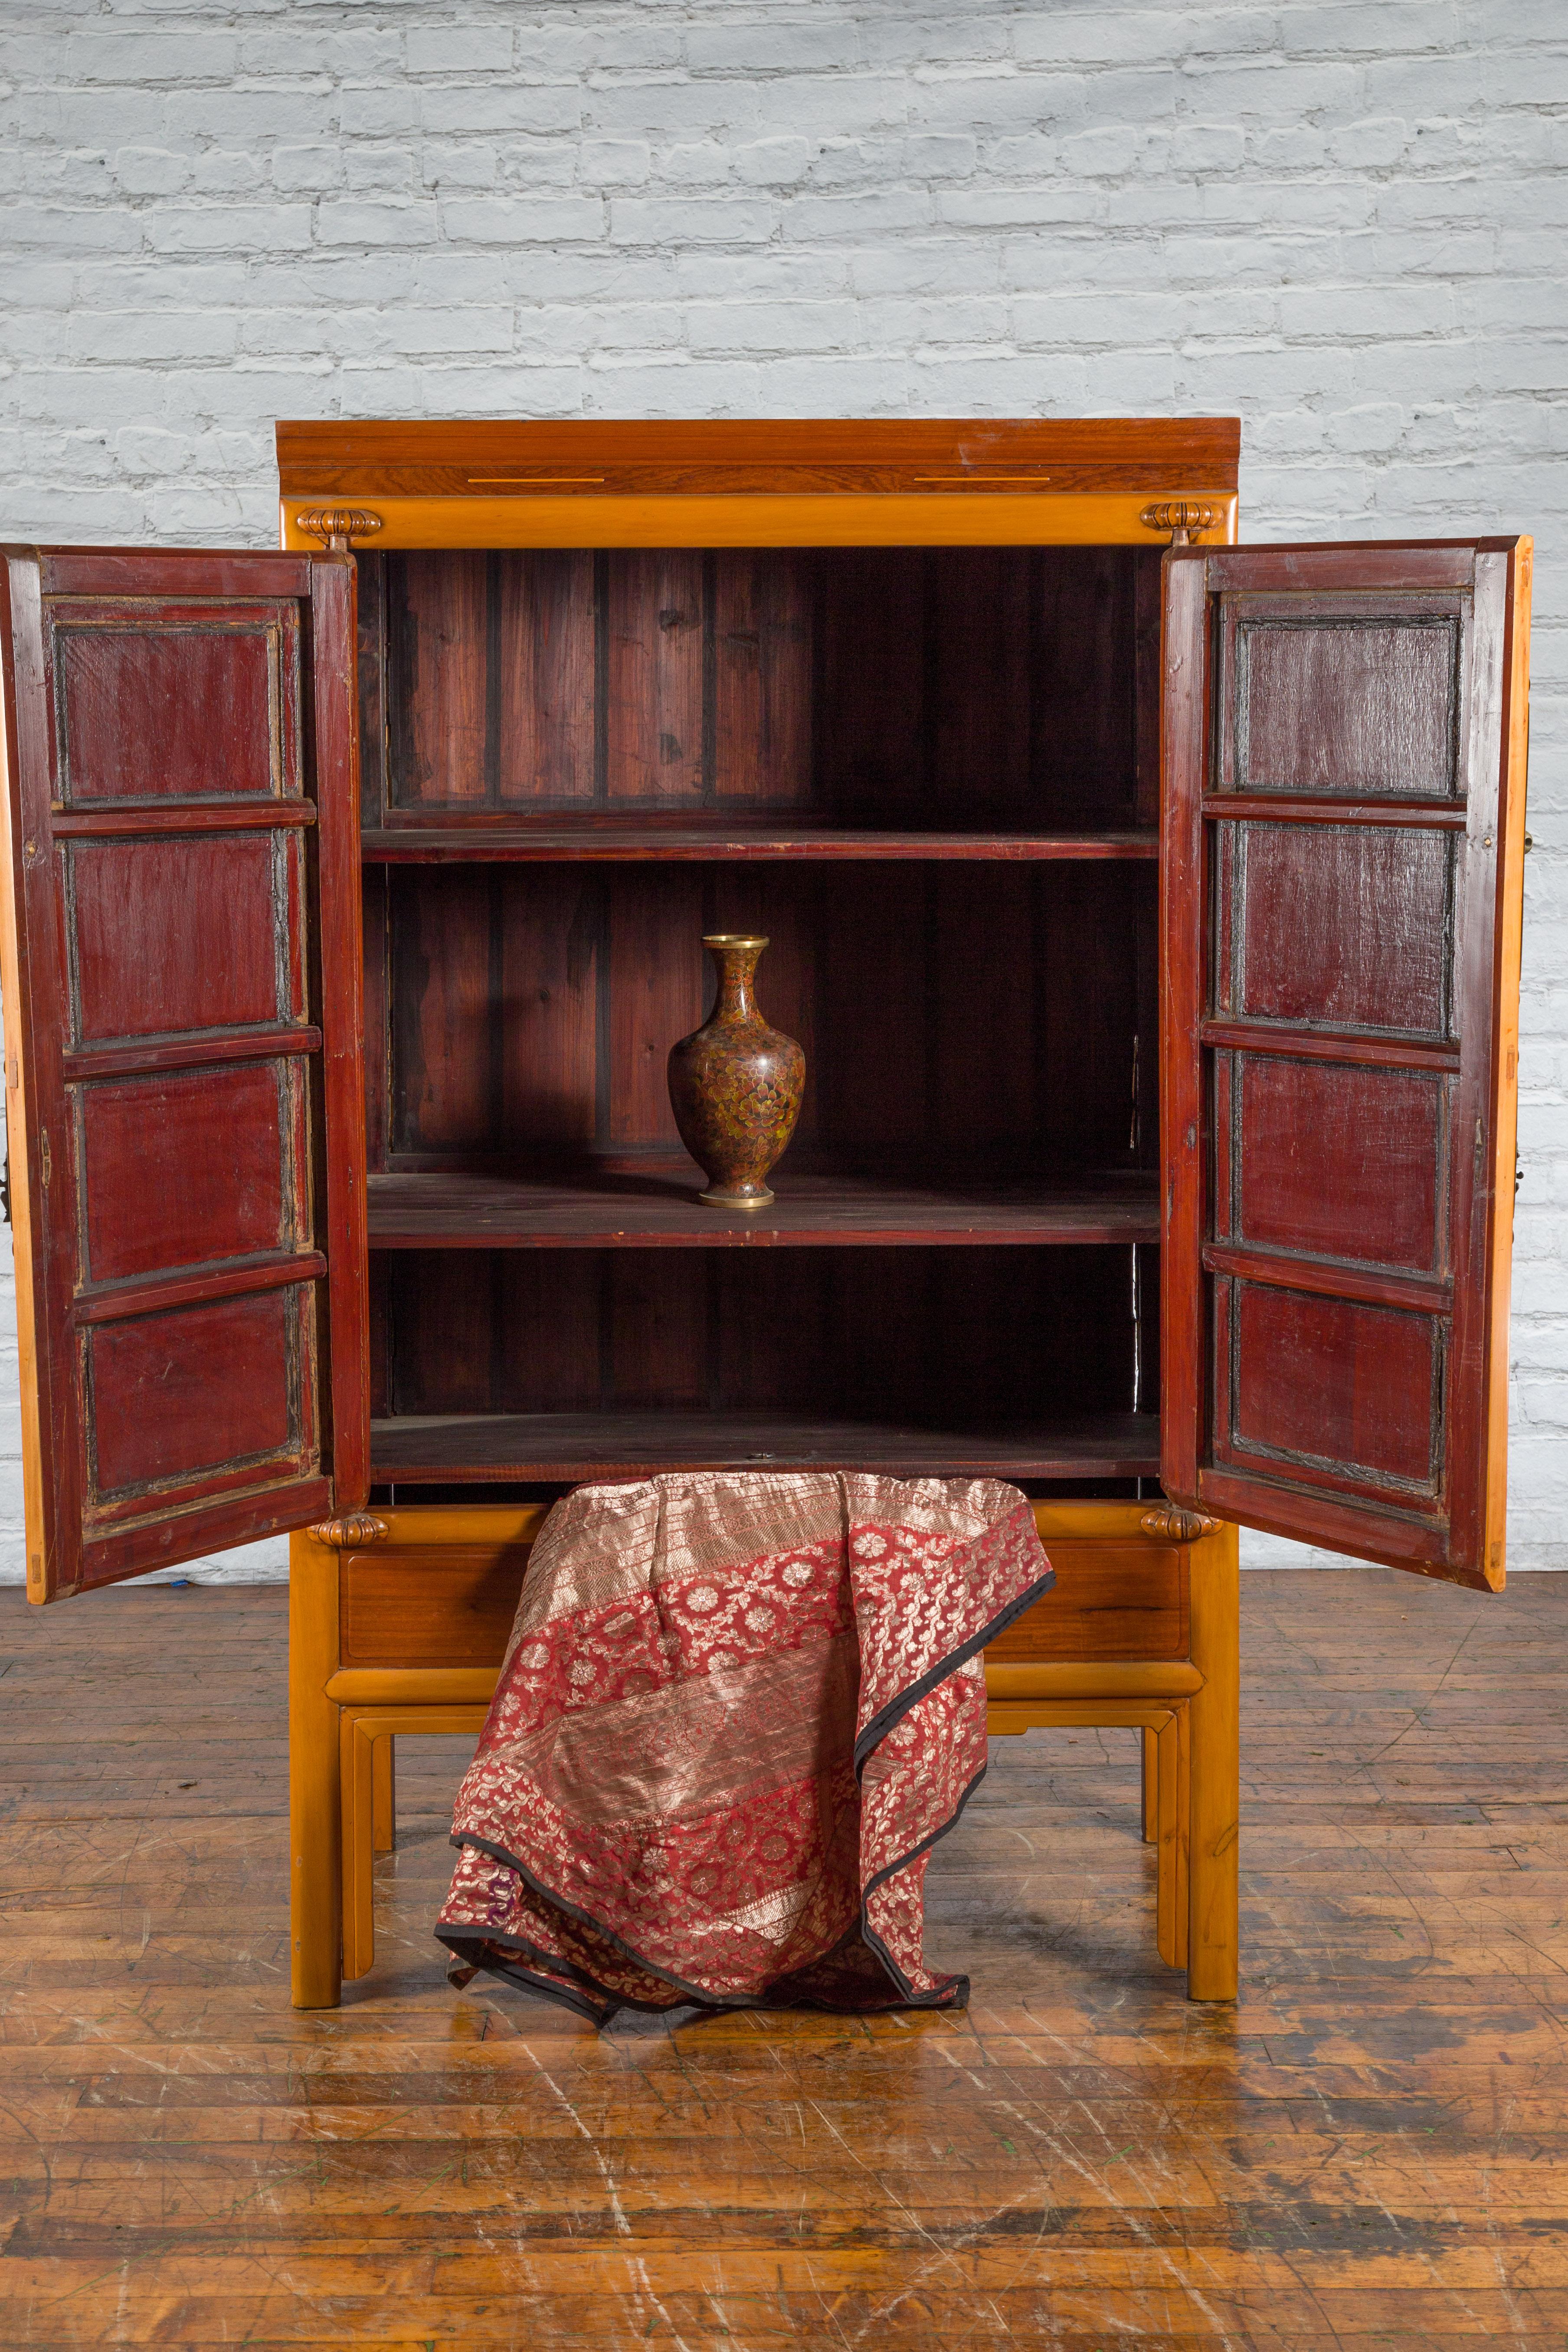 Chinese Qing Dynasty 19th Century Two-Toned Wooden Cabinet with Brass Hardware In Good Condition For Sale In Yonkers, NY